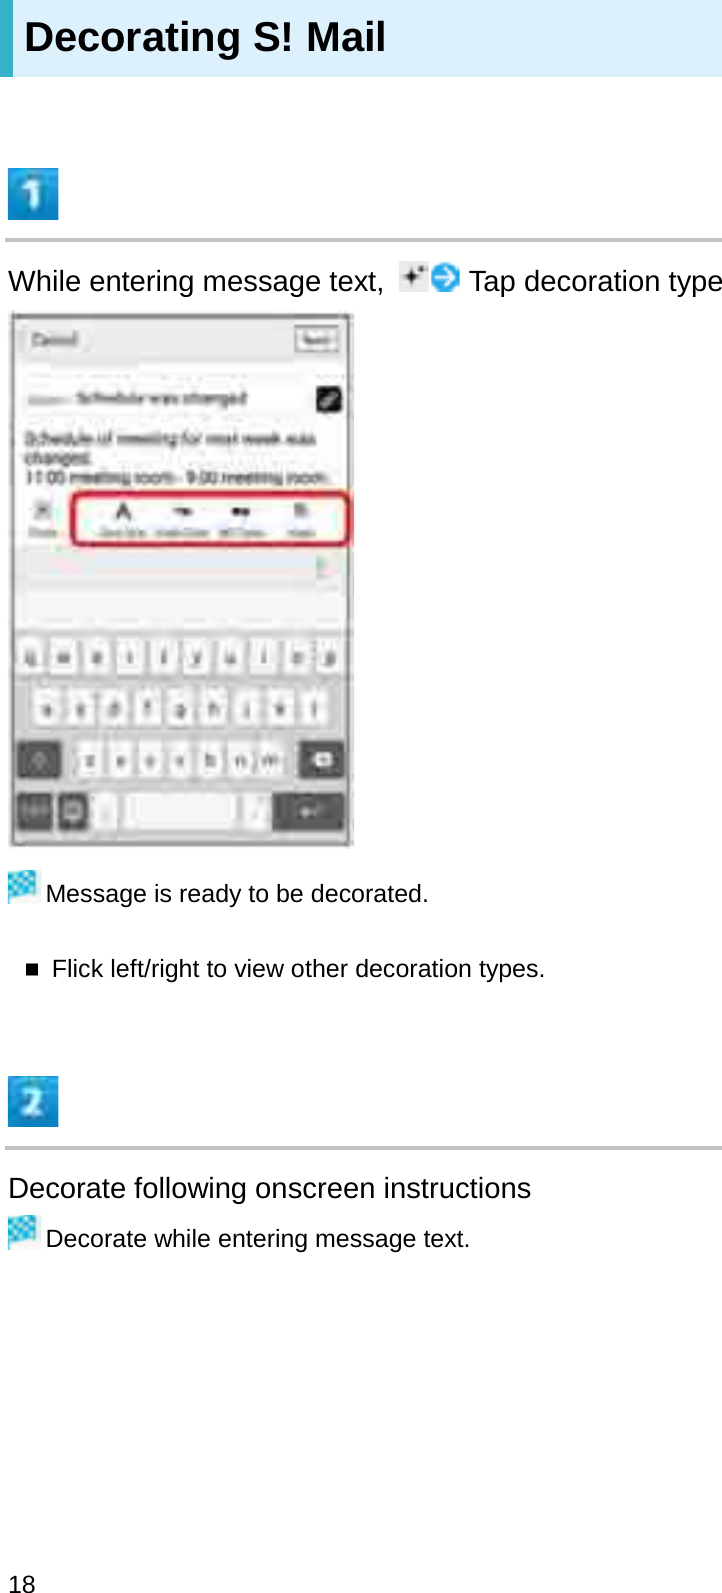 Decorating S! MailWhile entering message text,  Tap decoration typeMessage is ready to be decorated.Flick left/right to view other decoration types.Decorate following onscreen instructionsDecorate while entering message text.18